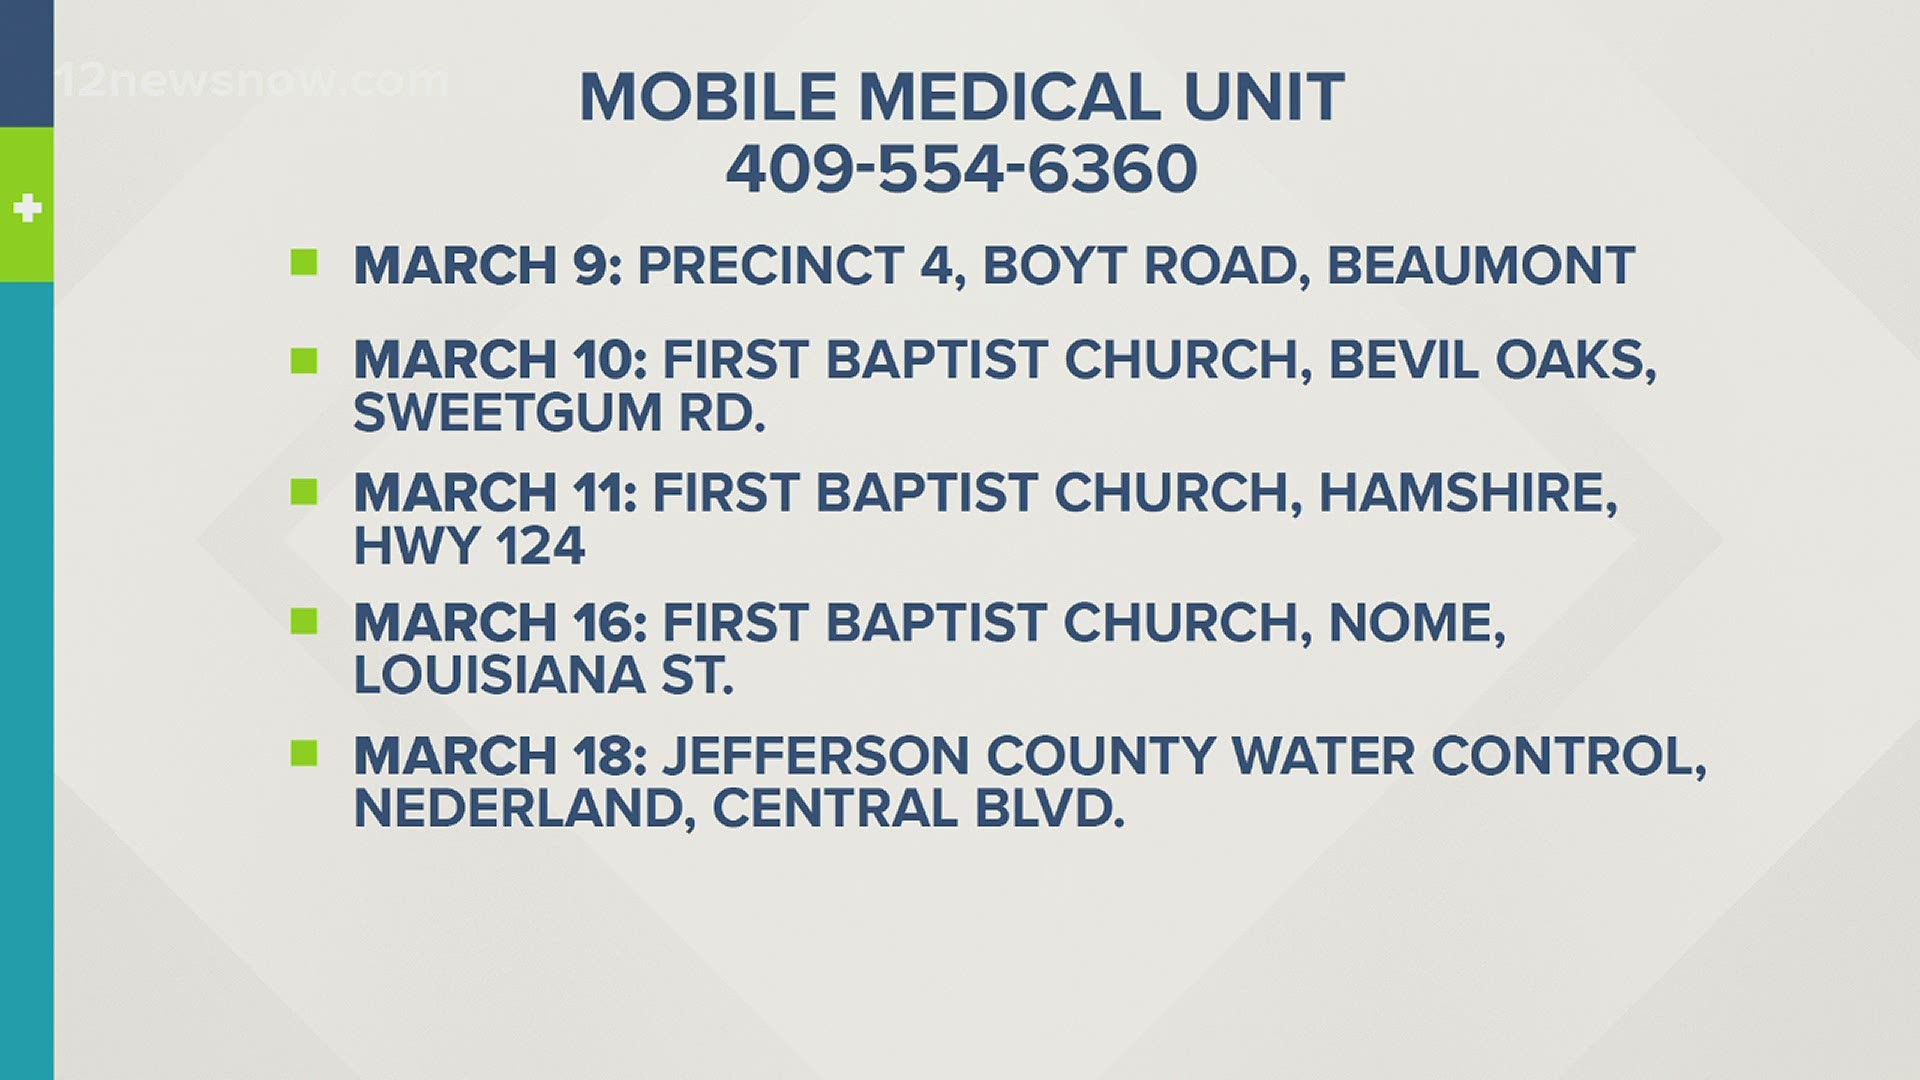 Vaccinations at the Jefferson County Health Department's Mobile Medical Unit will start at 9 a.m. Tuesday, March 9 by appointment only since supplies are limited.